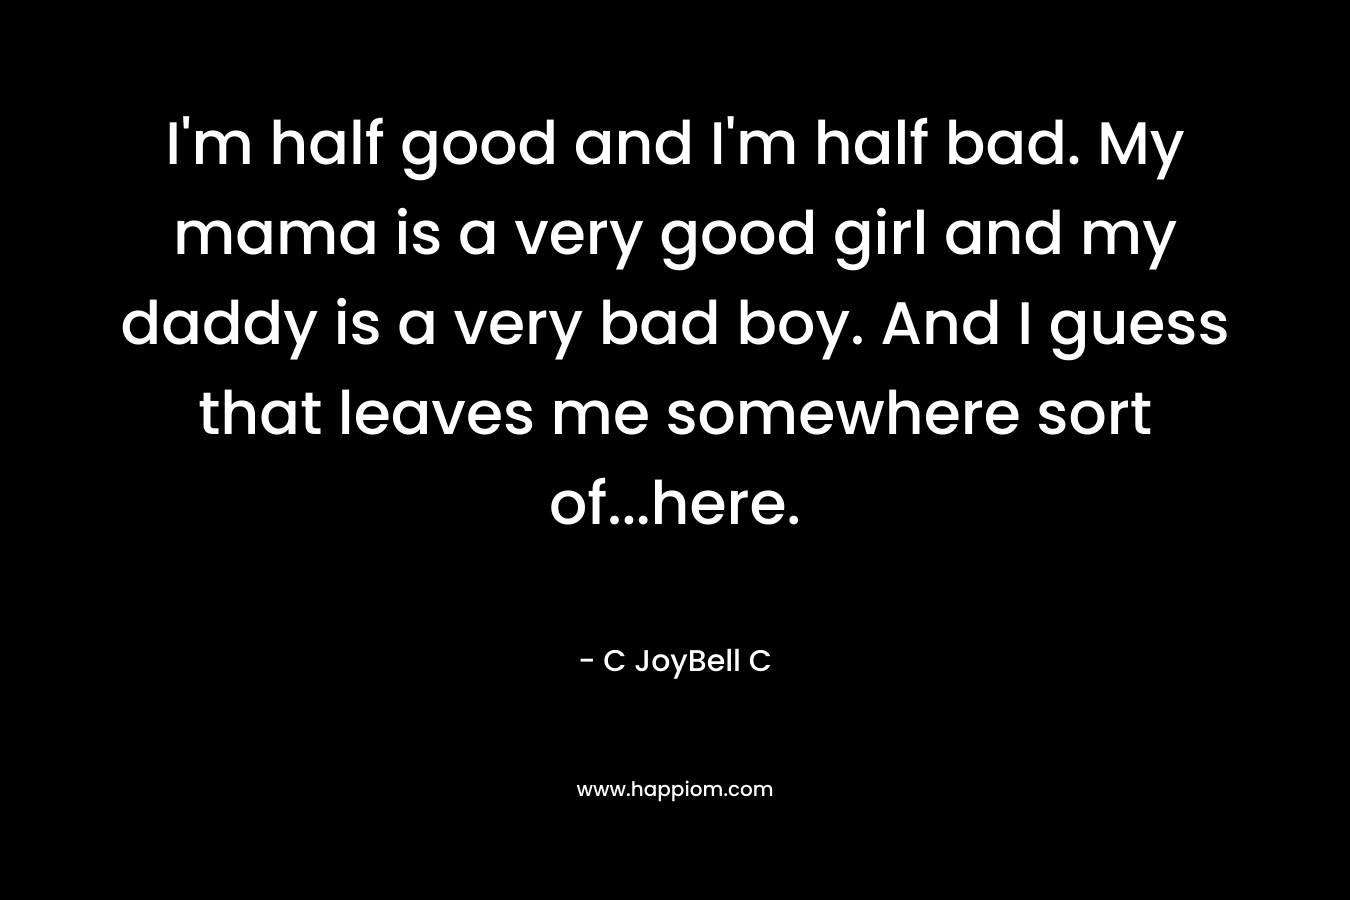 I’m half good and I’m half bad. My mama is a very good girl and my daddy is a very bad boy. And I guess that leaves me somewhere sort of…here. – C JoyBell C